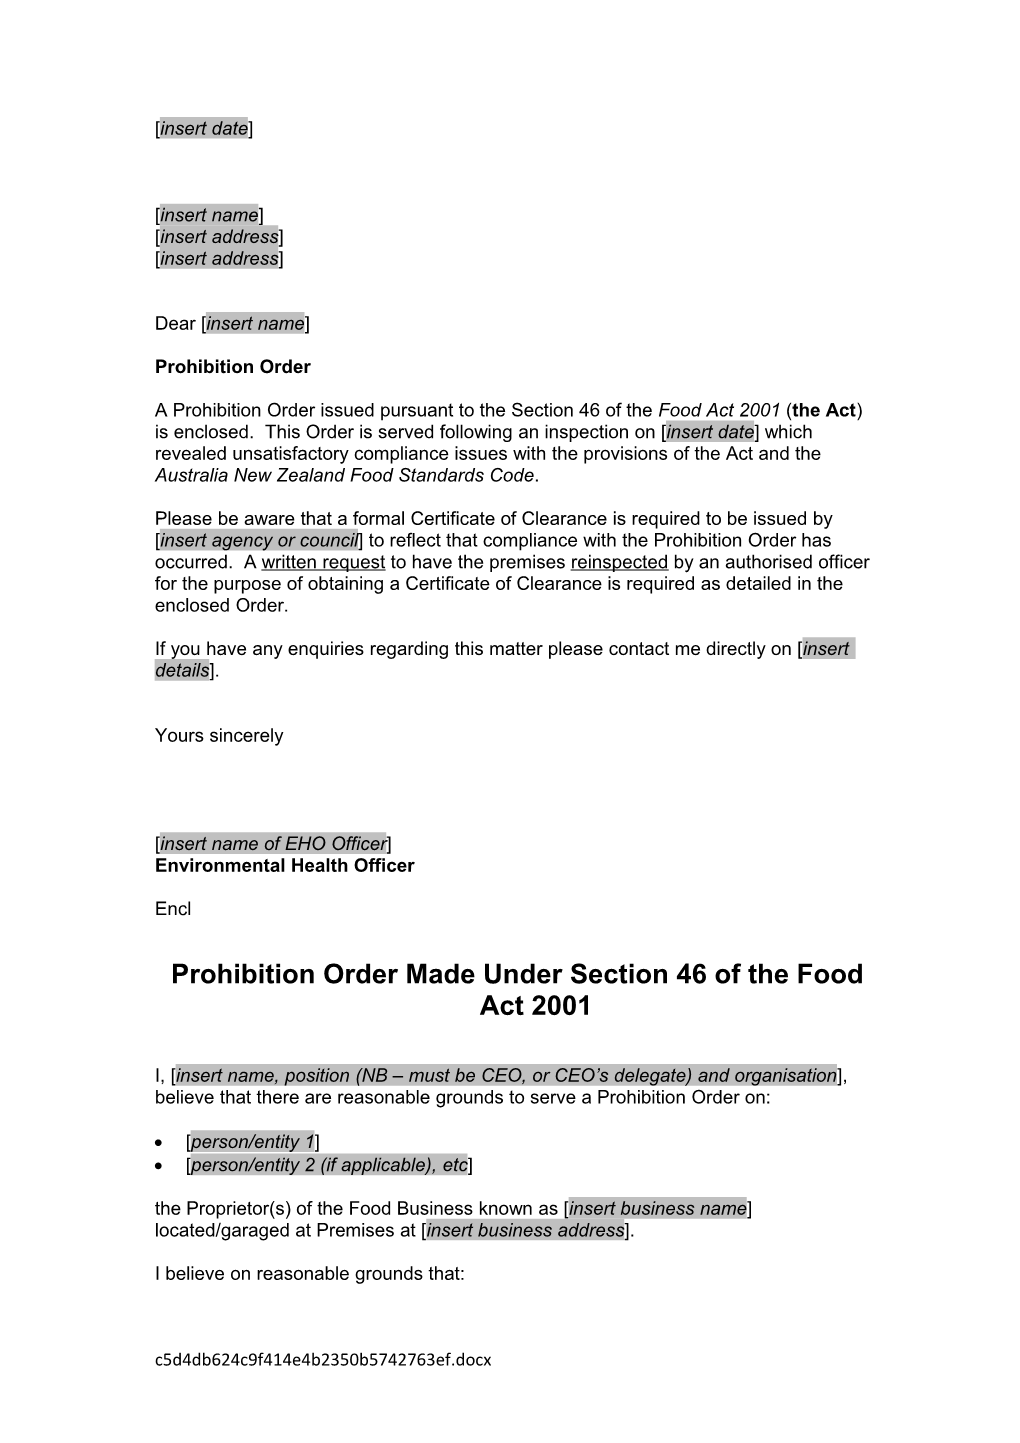 Prohibition Order and Letter